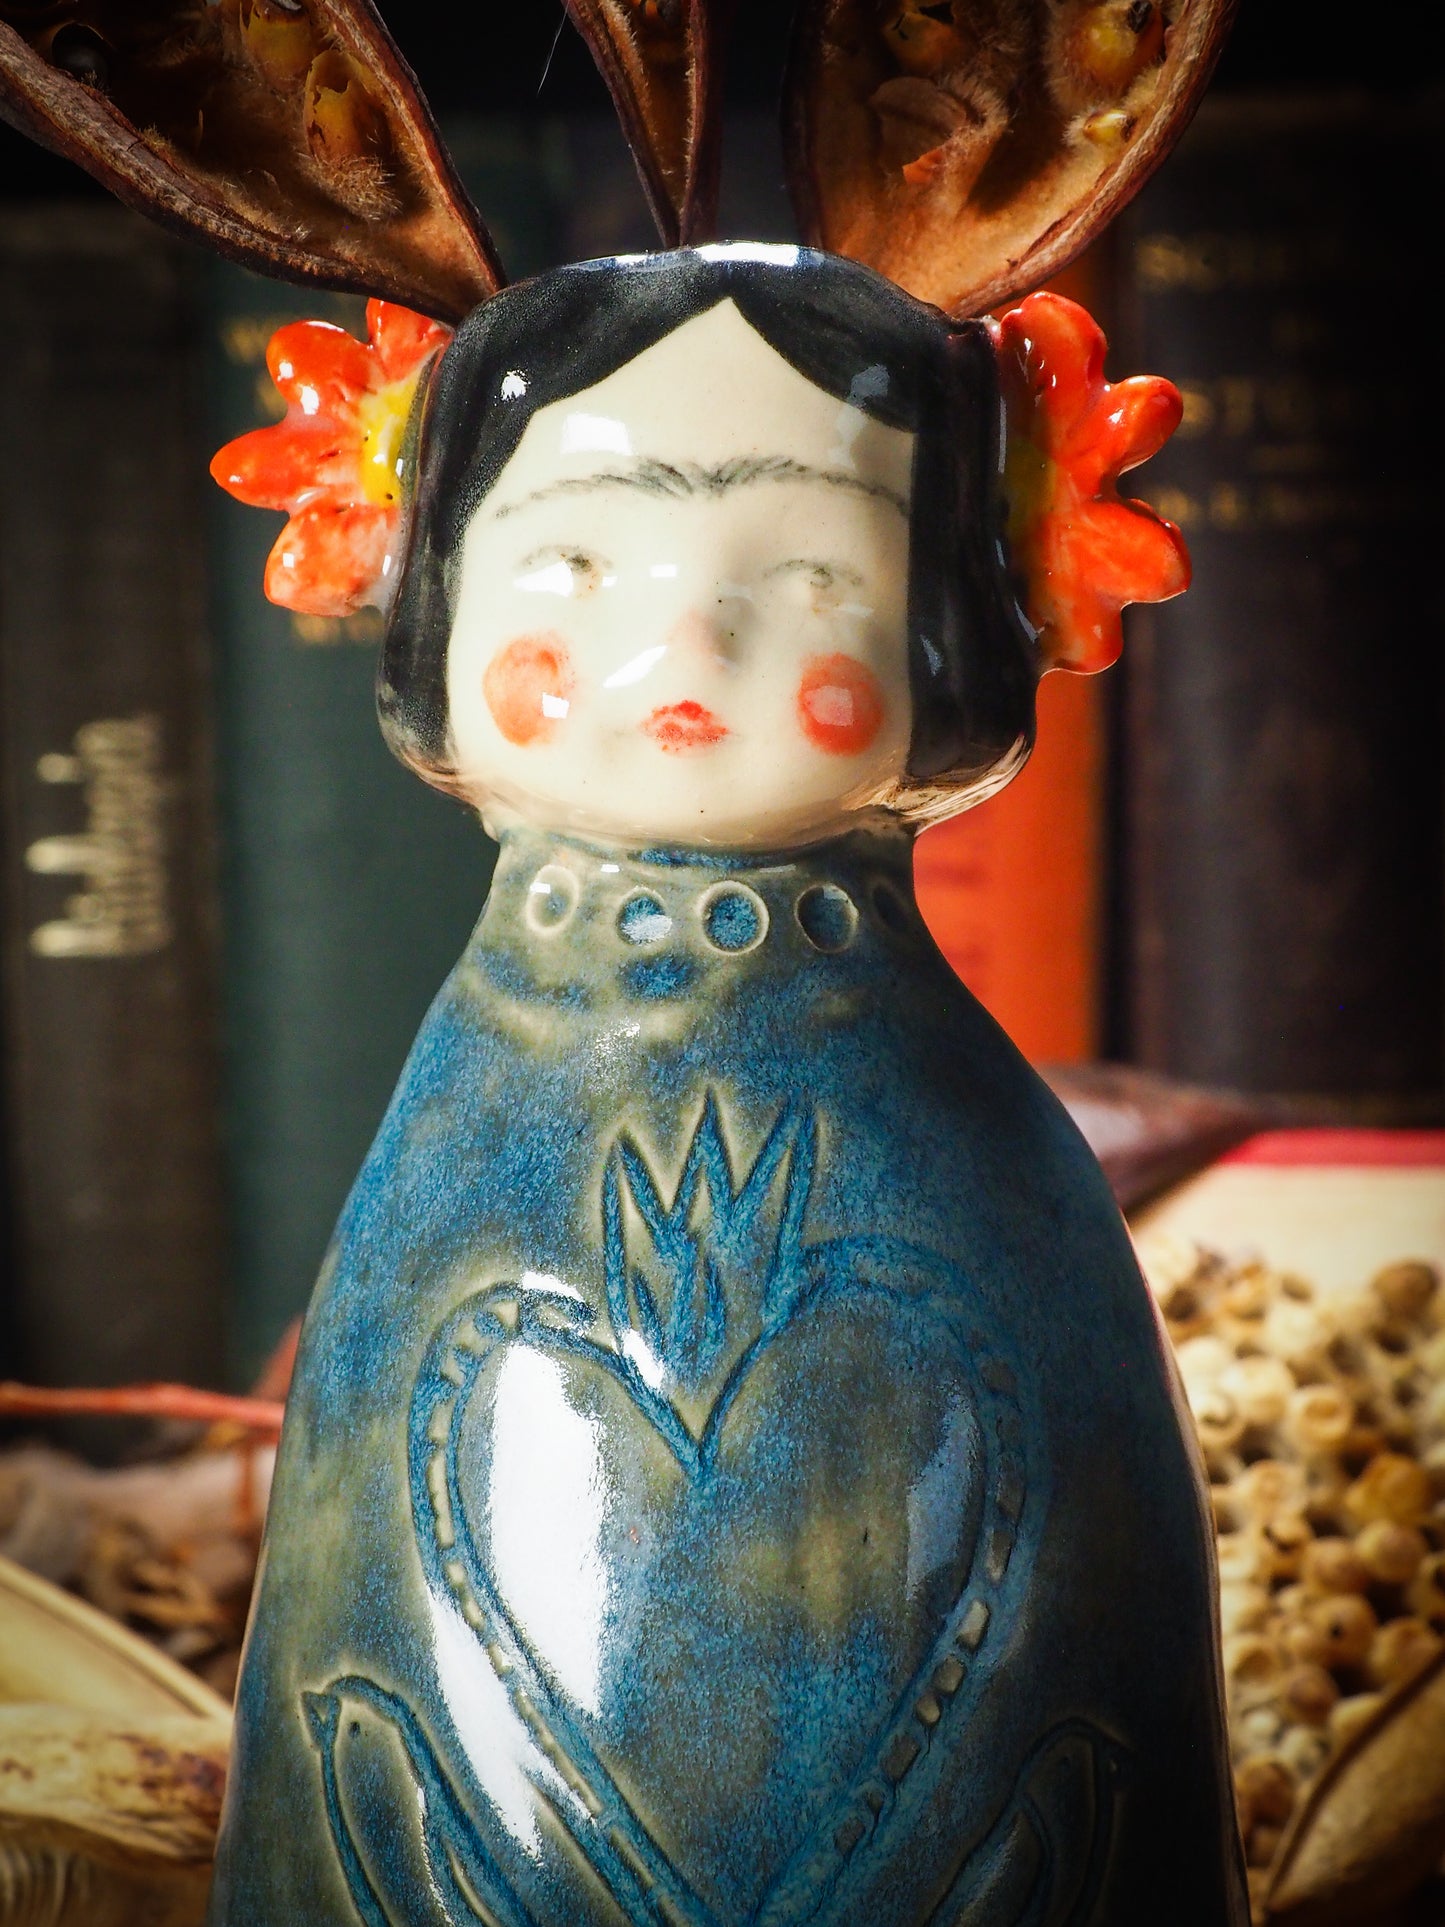 Original handmade ceramic flower vase,  artist brush and pencil holder by Idania Salcido, Danita Art. Frida Kahlo with flowers in her head and sgraffito body details. Handmade touch to any artist's studio with handmade glazed ceramic good for watercolors acrylics inks and oil paints. Clean with water or mineral spirits.